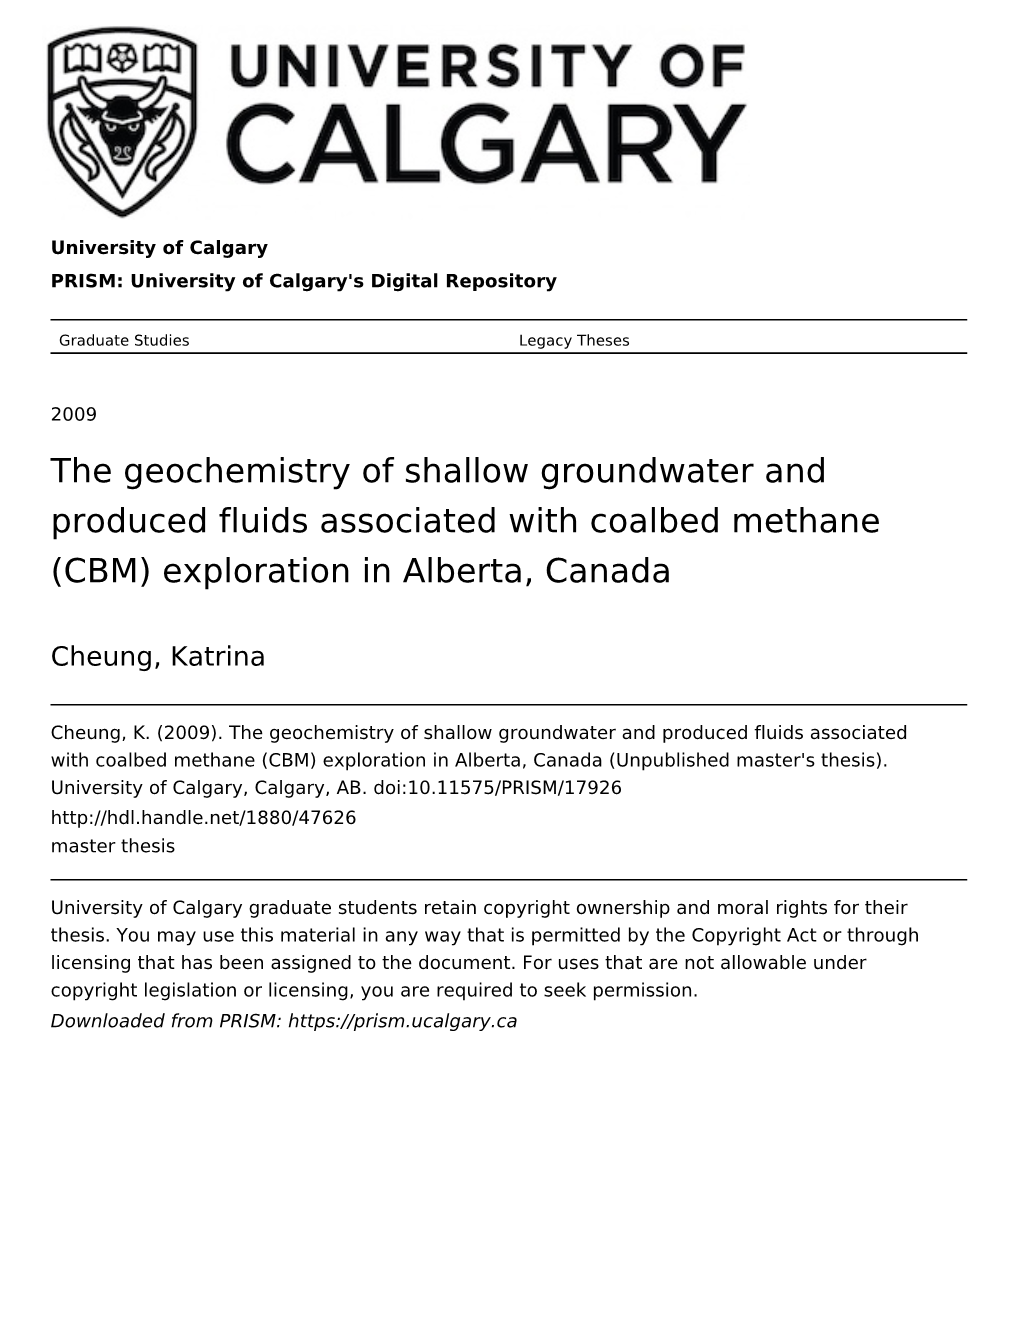 The Geochemistry of Shallow Groundwater and Produced Fluids Associated with Coalbed Methane (CBM) Exploration in Alberta, Canada